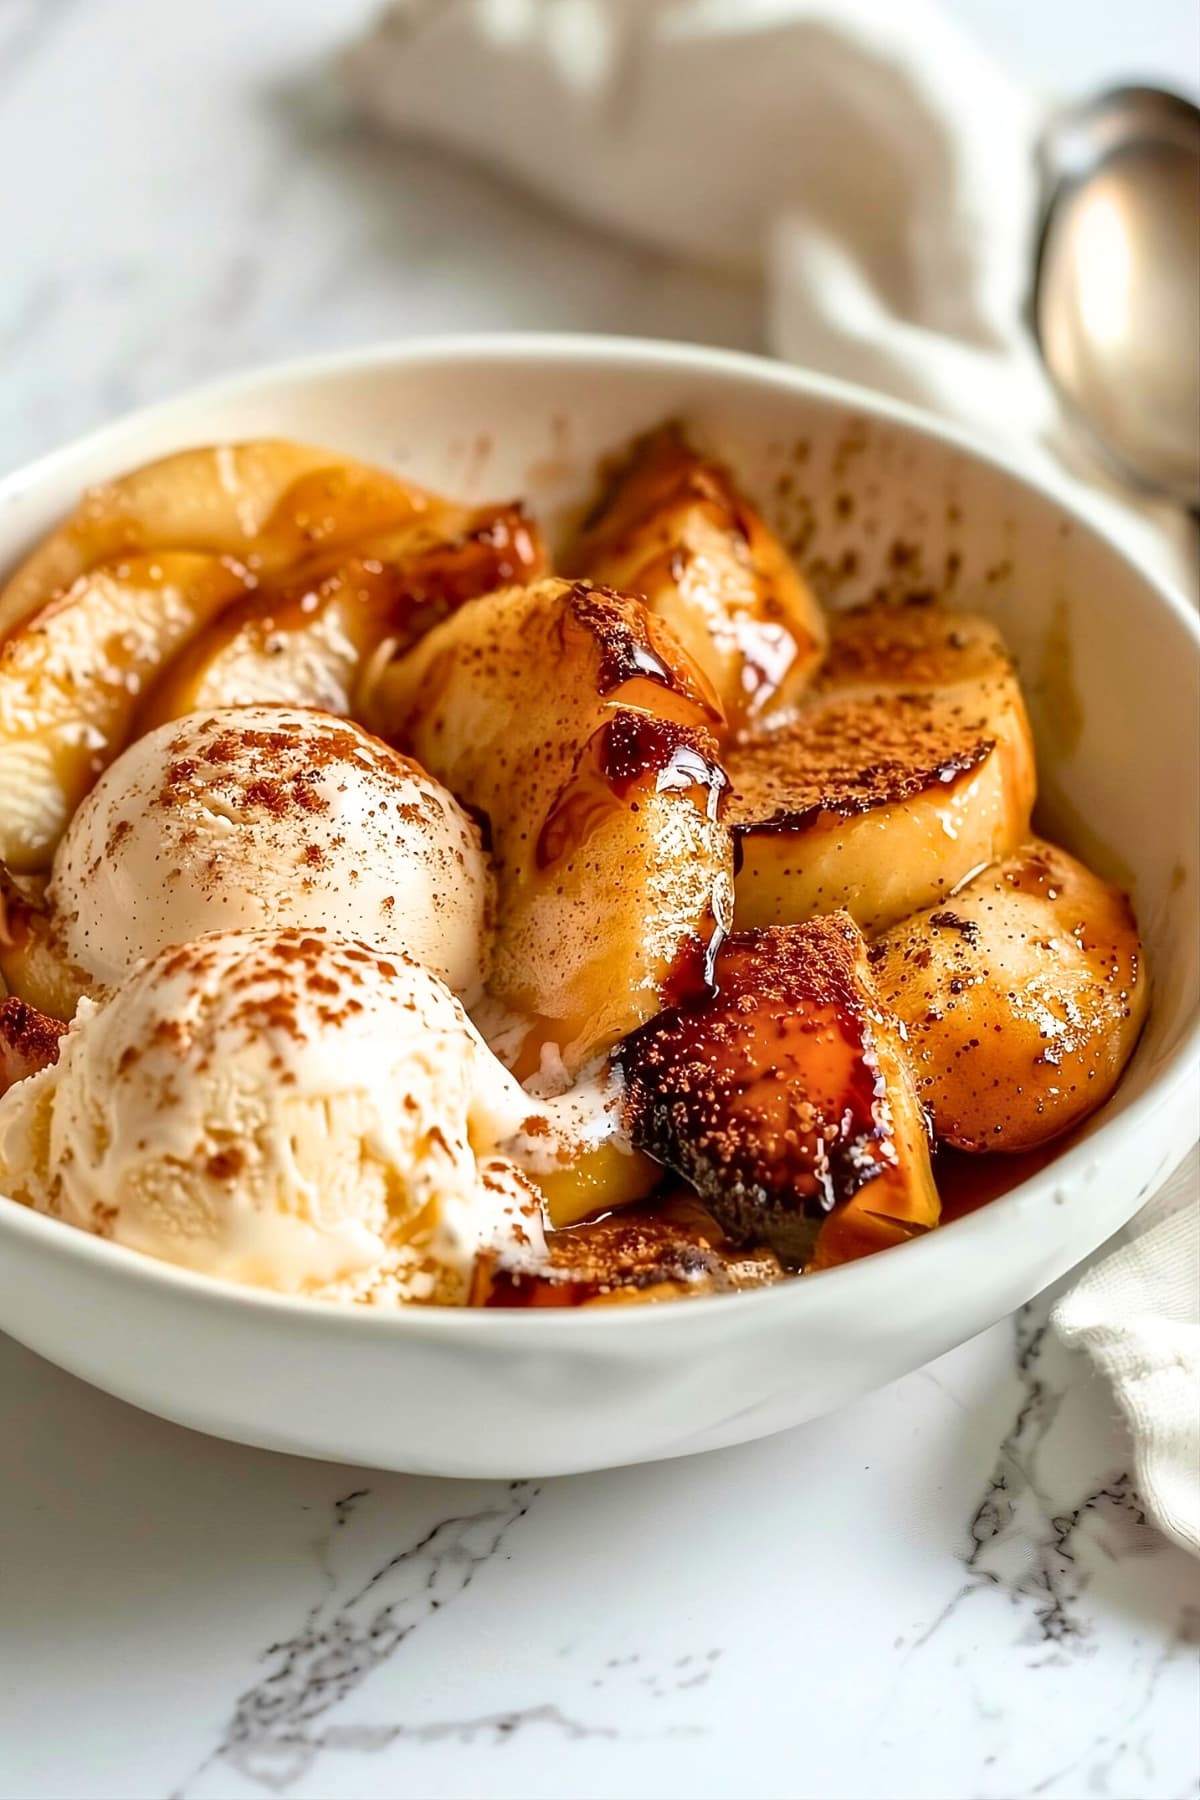 Baked apple with scoops of vanilla ice cream on bowl.